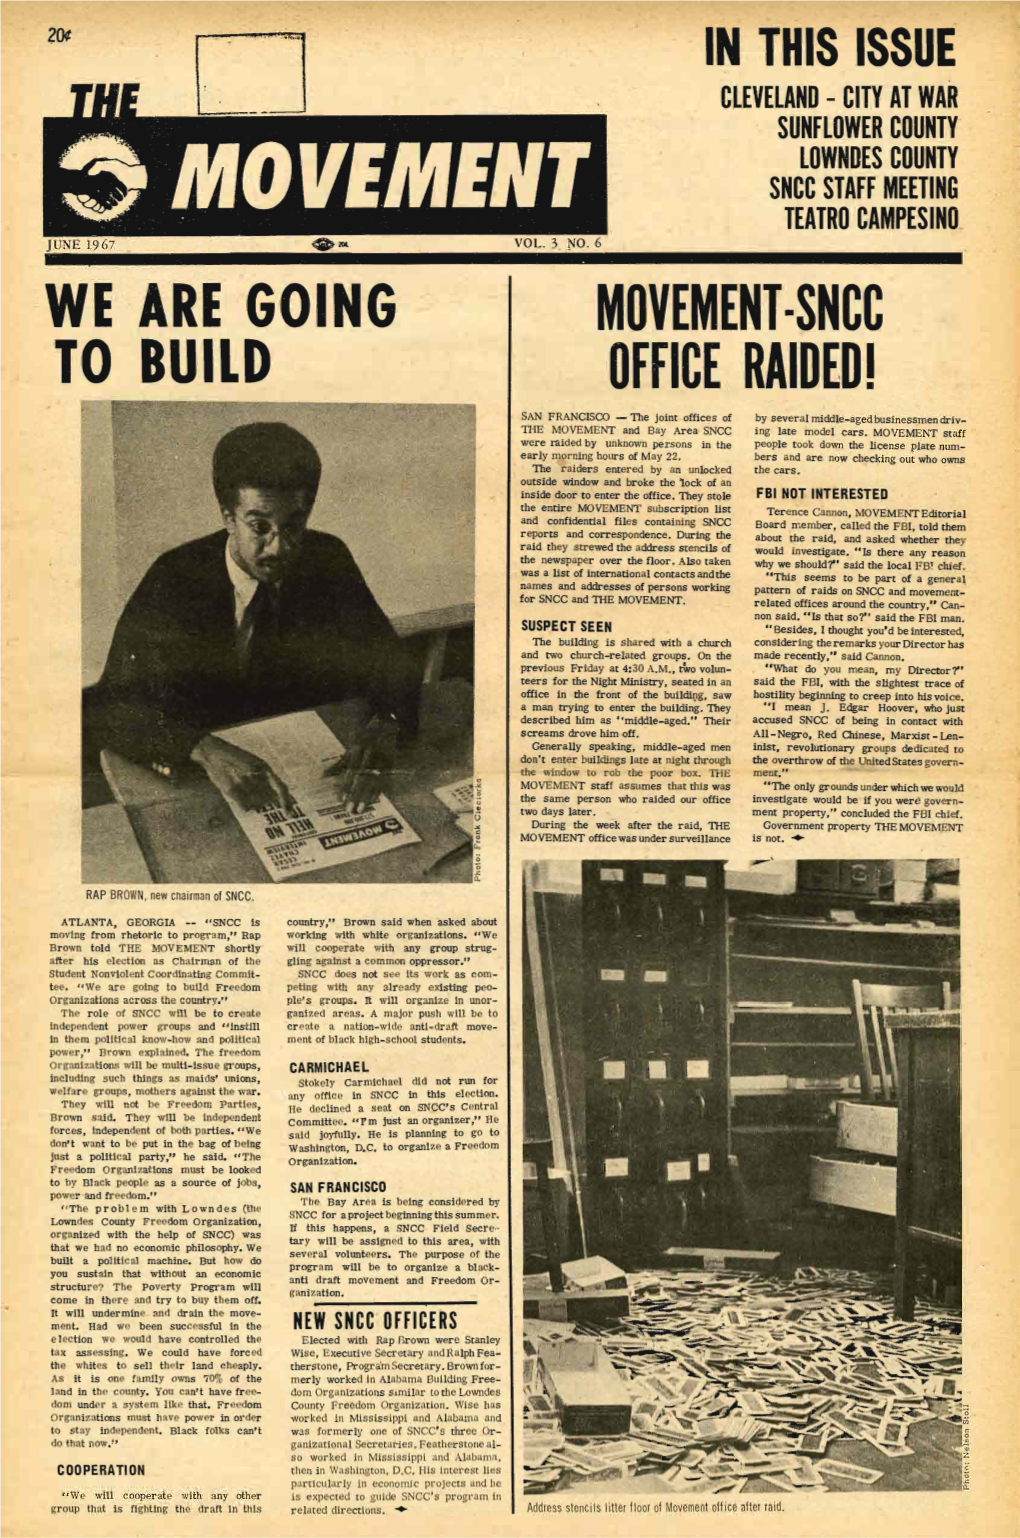 June 1967 We Are Going Movement-Sncc to Build Office Raided I